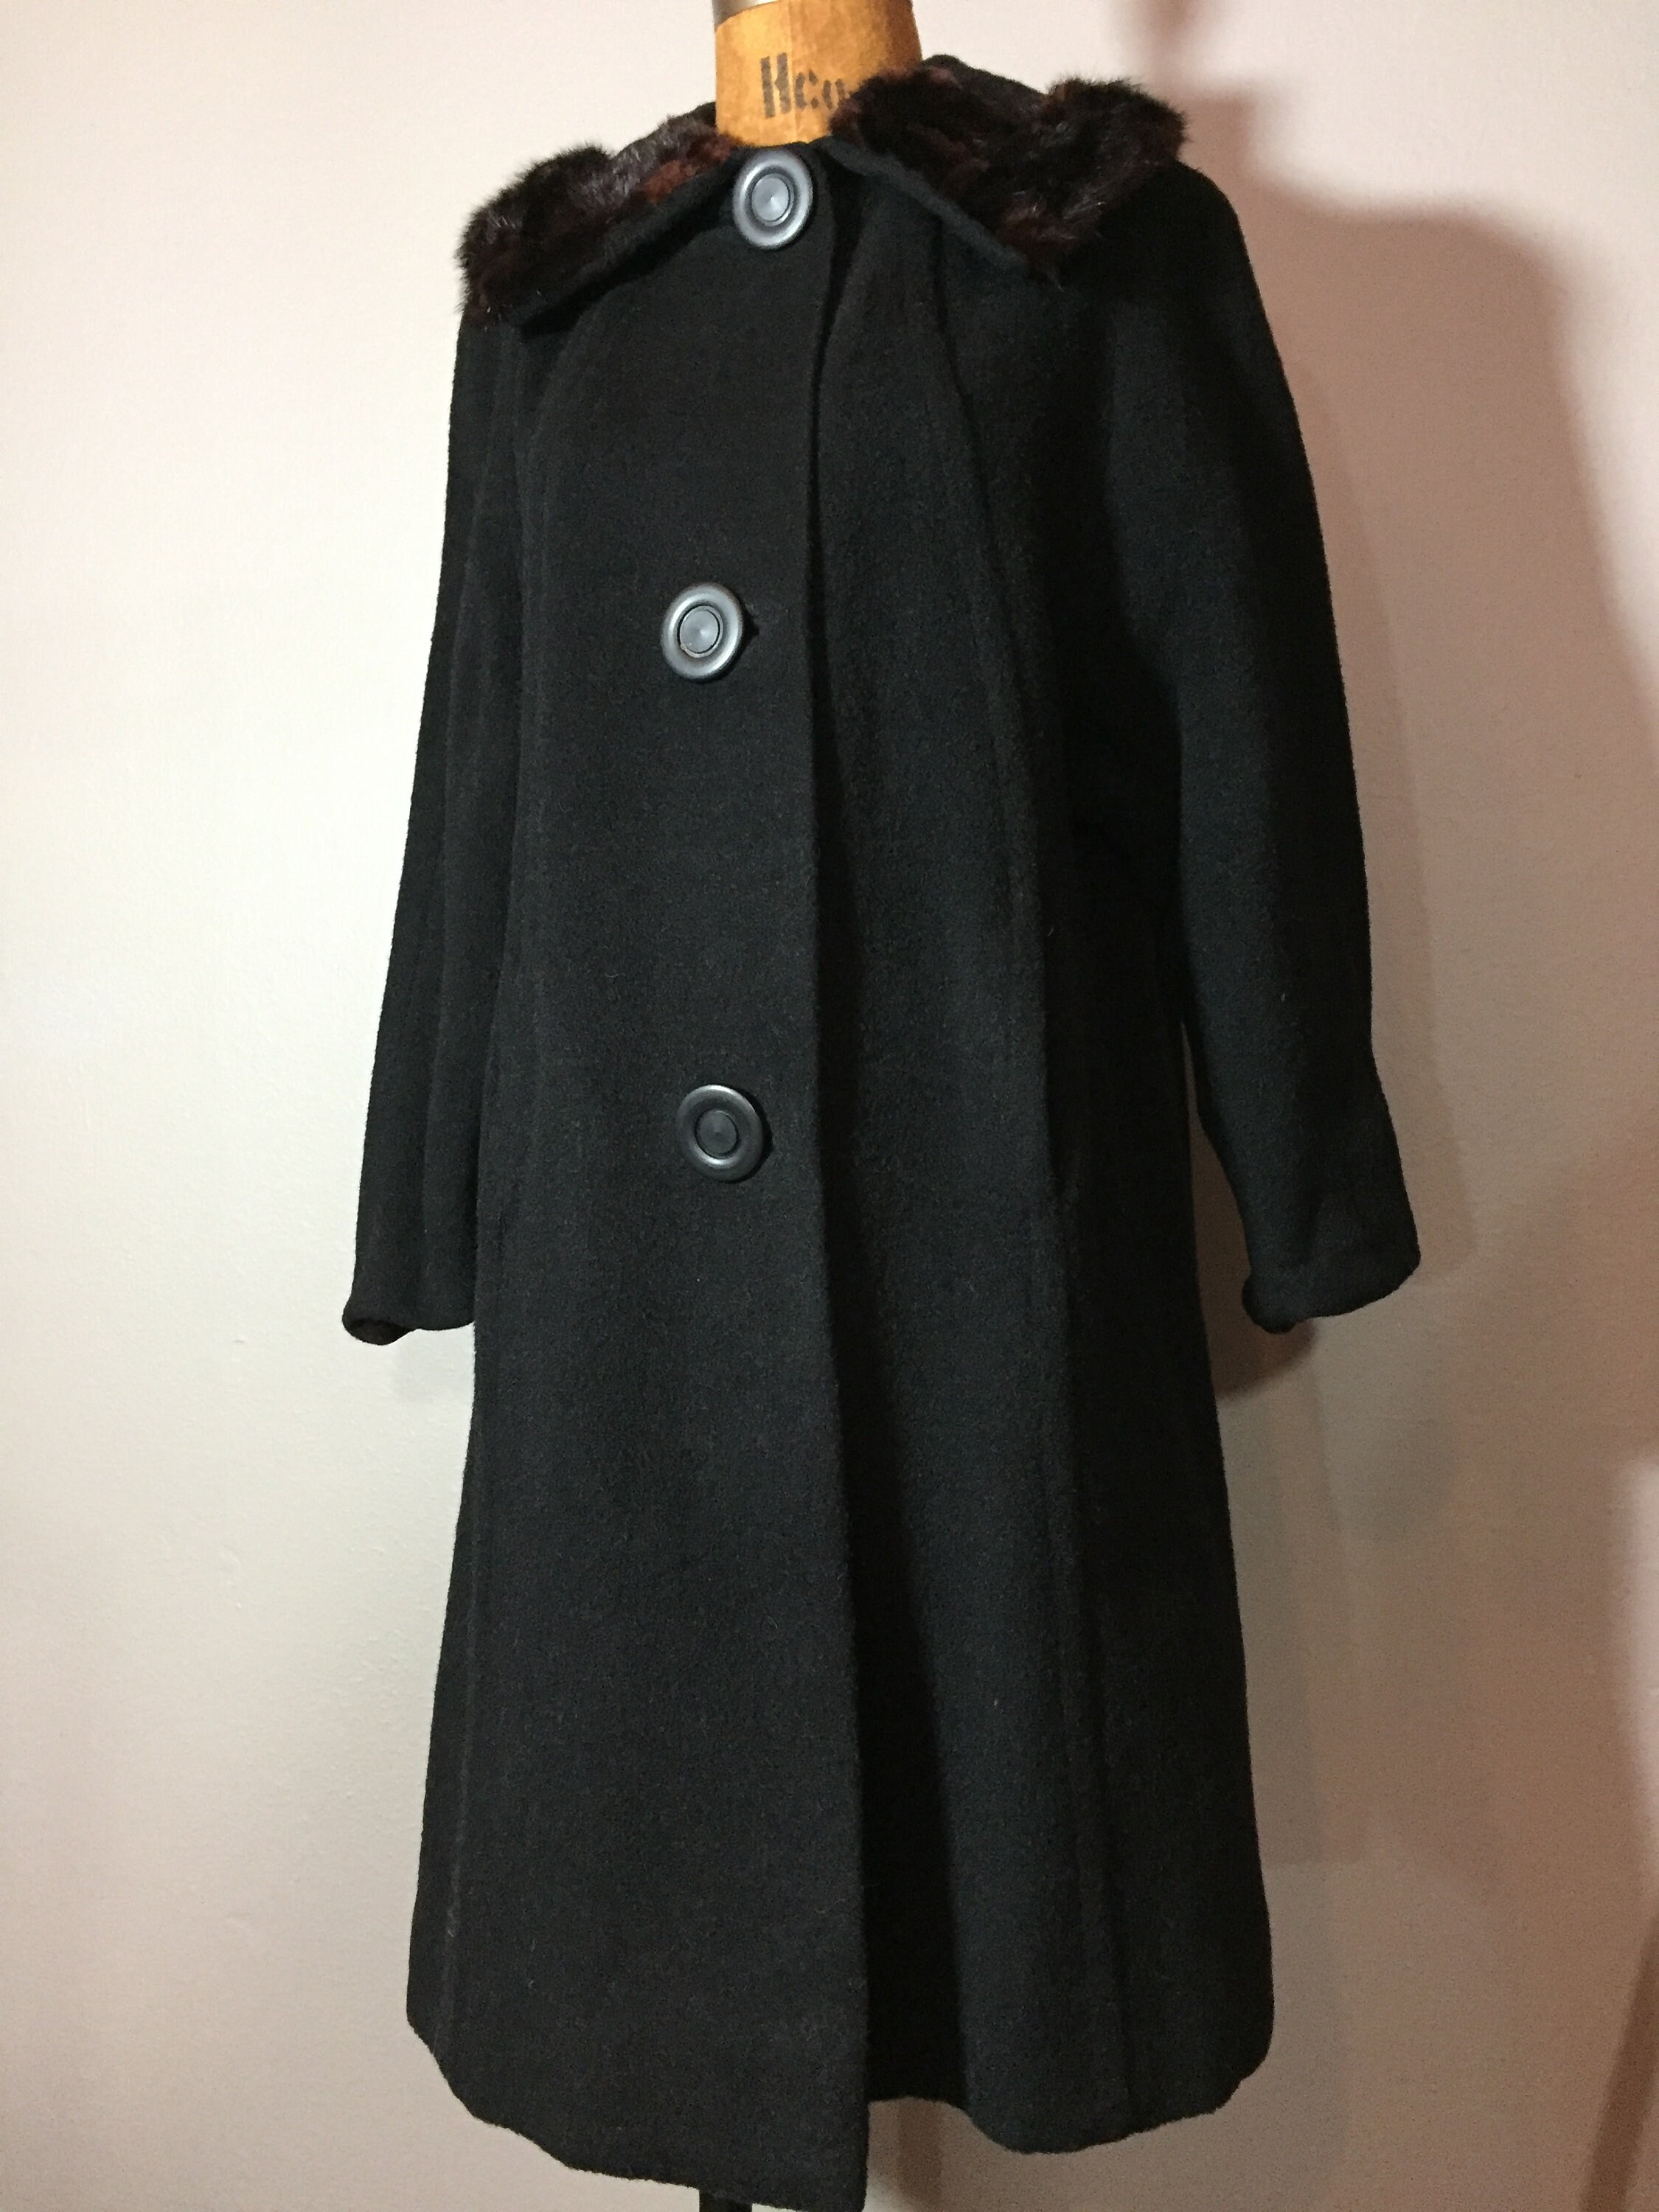 50s Black Wool Genuine Fur Collar Swing Coat Giant Buttons - Etsy